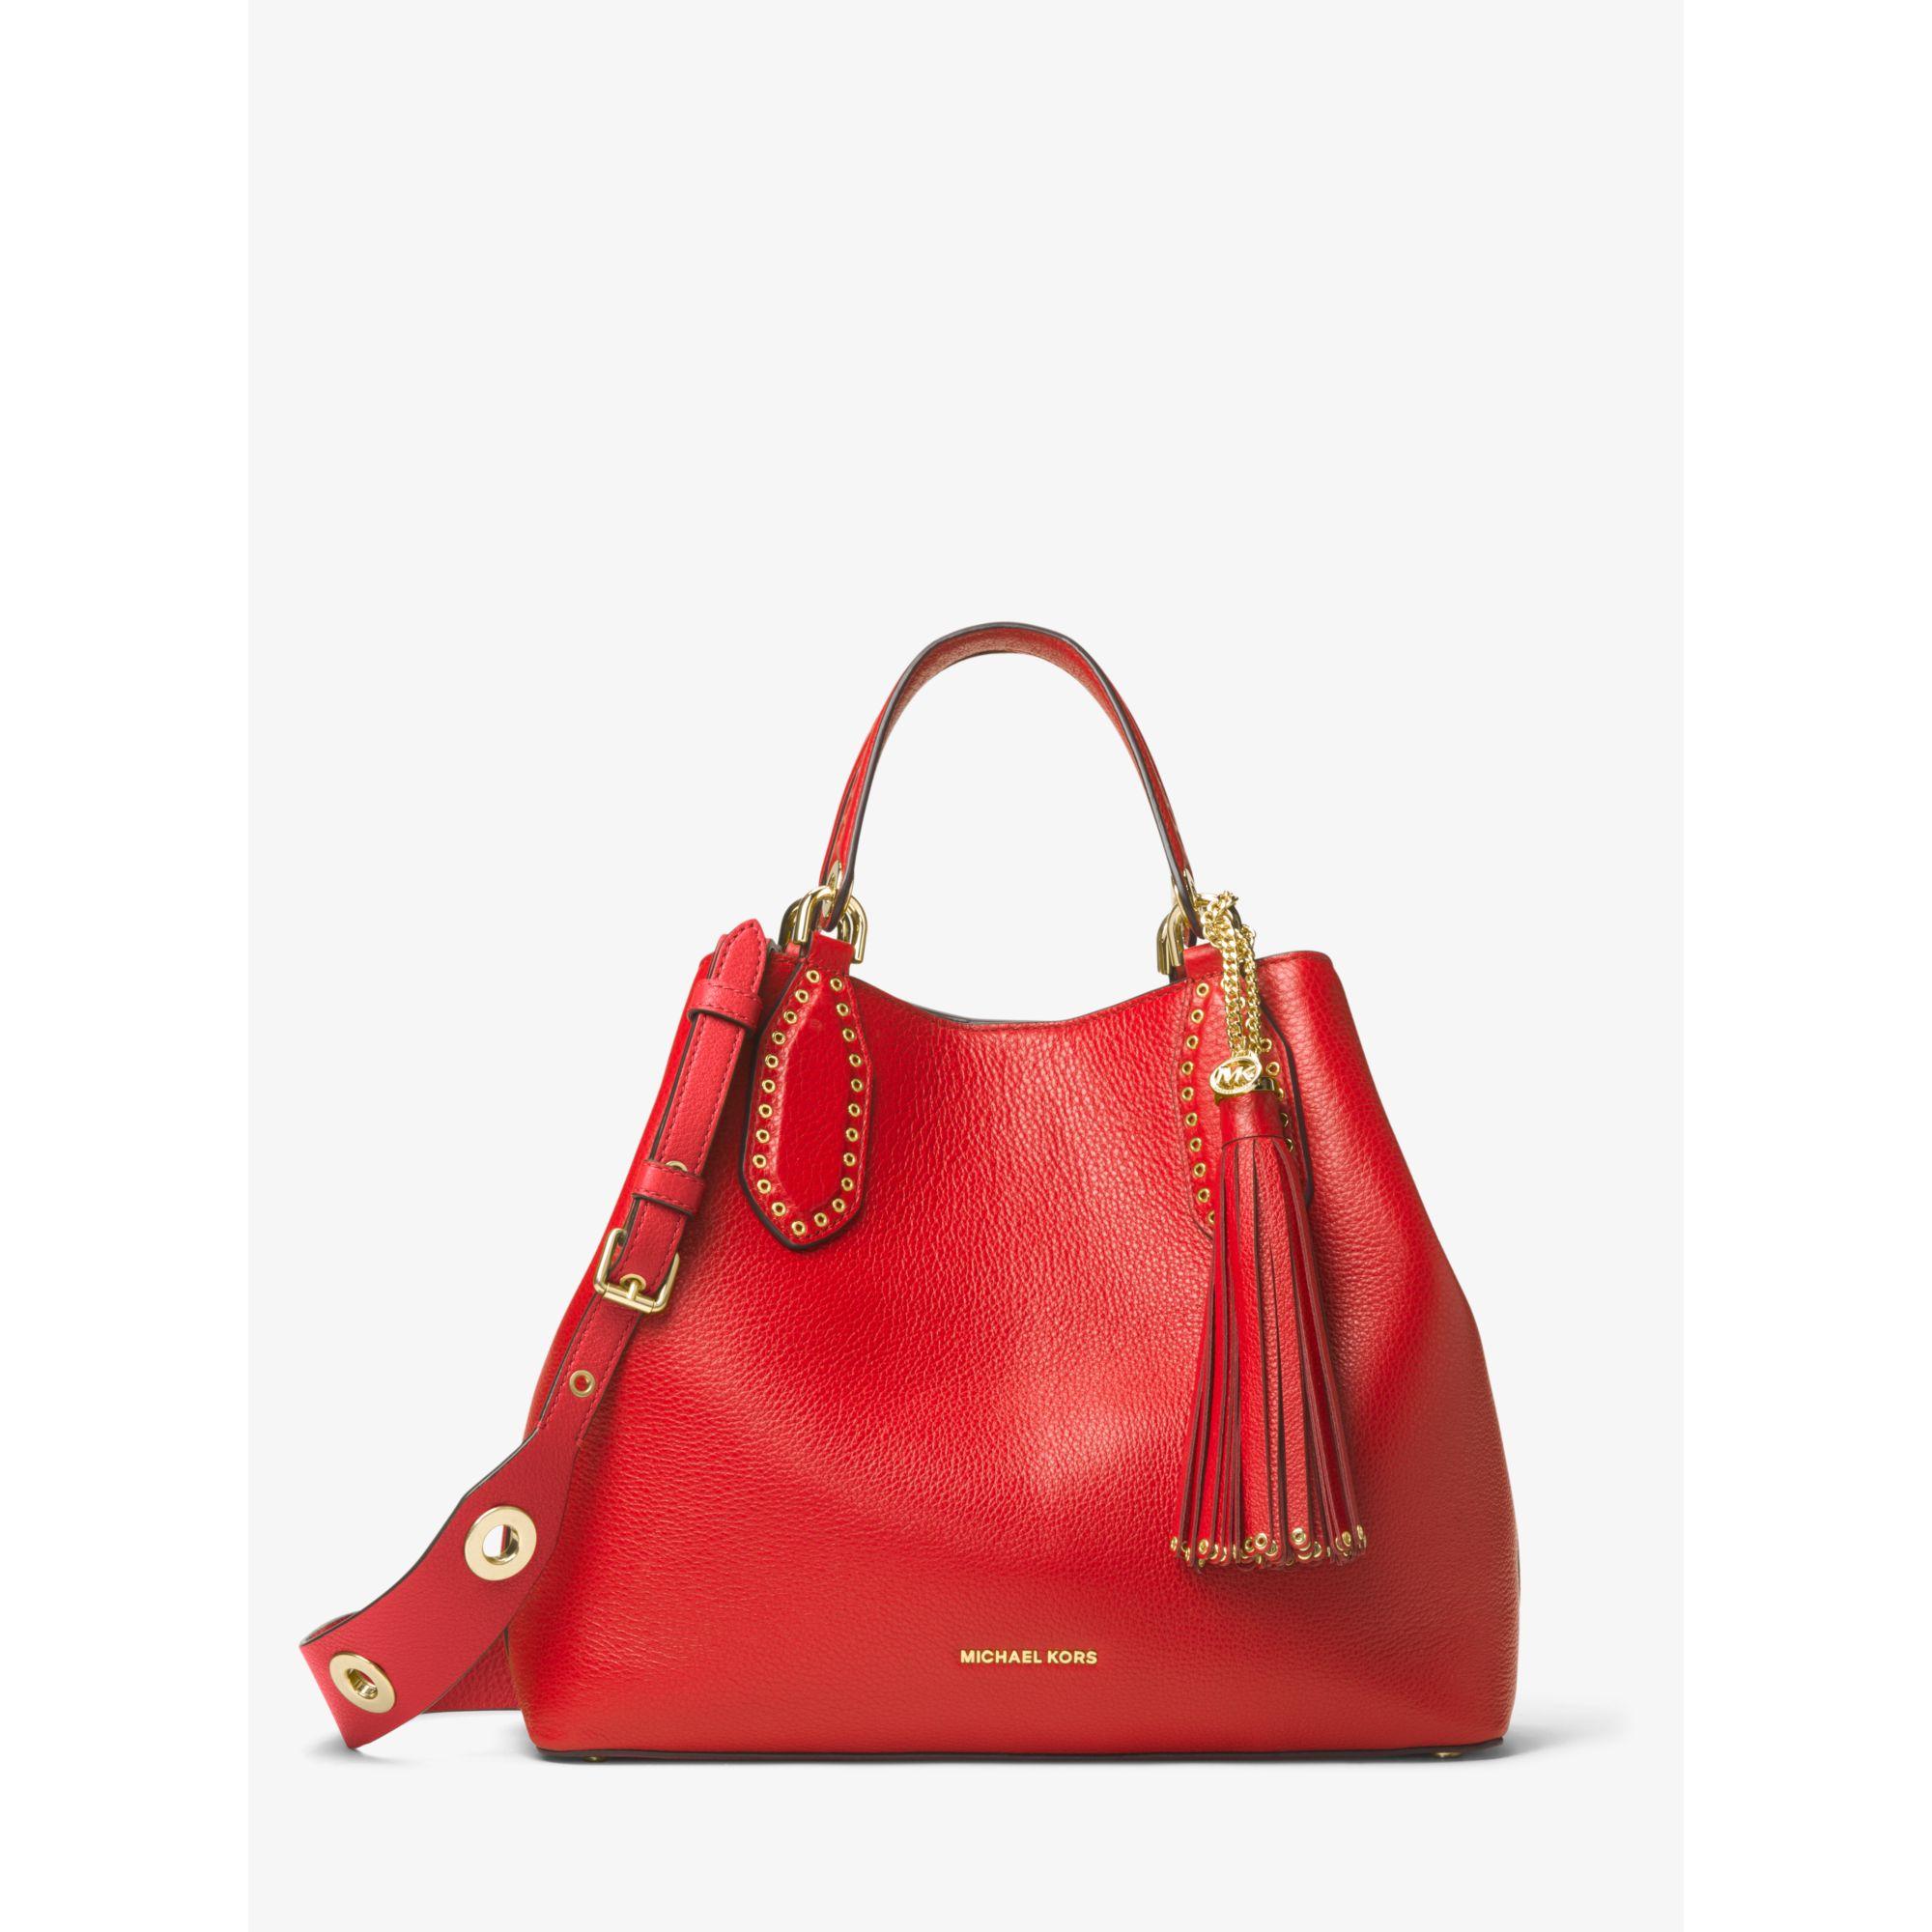 Michael kors Brooklyn Large Leather Shoulder Bag in Red | Lyst